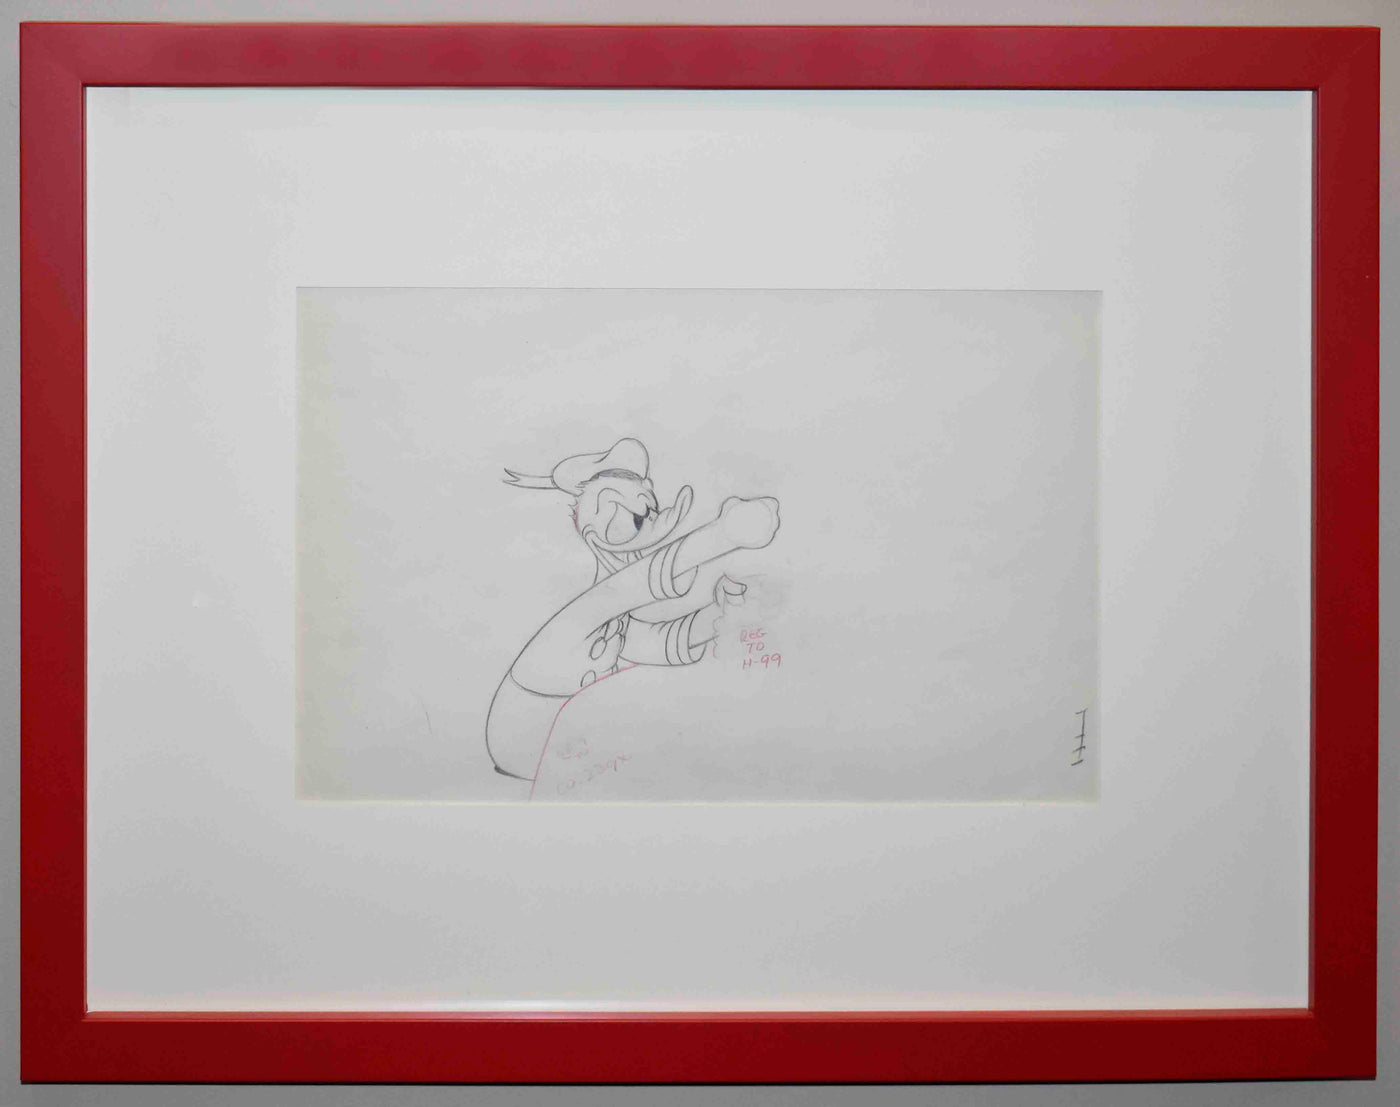 Original Walt Disney Production Drawing of Donald Duck from Donald's Cousin Gus (1939)